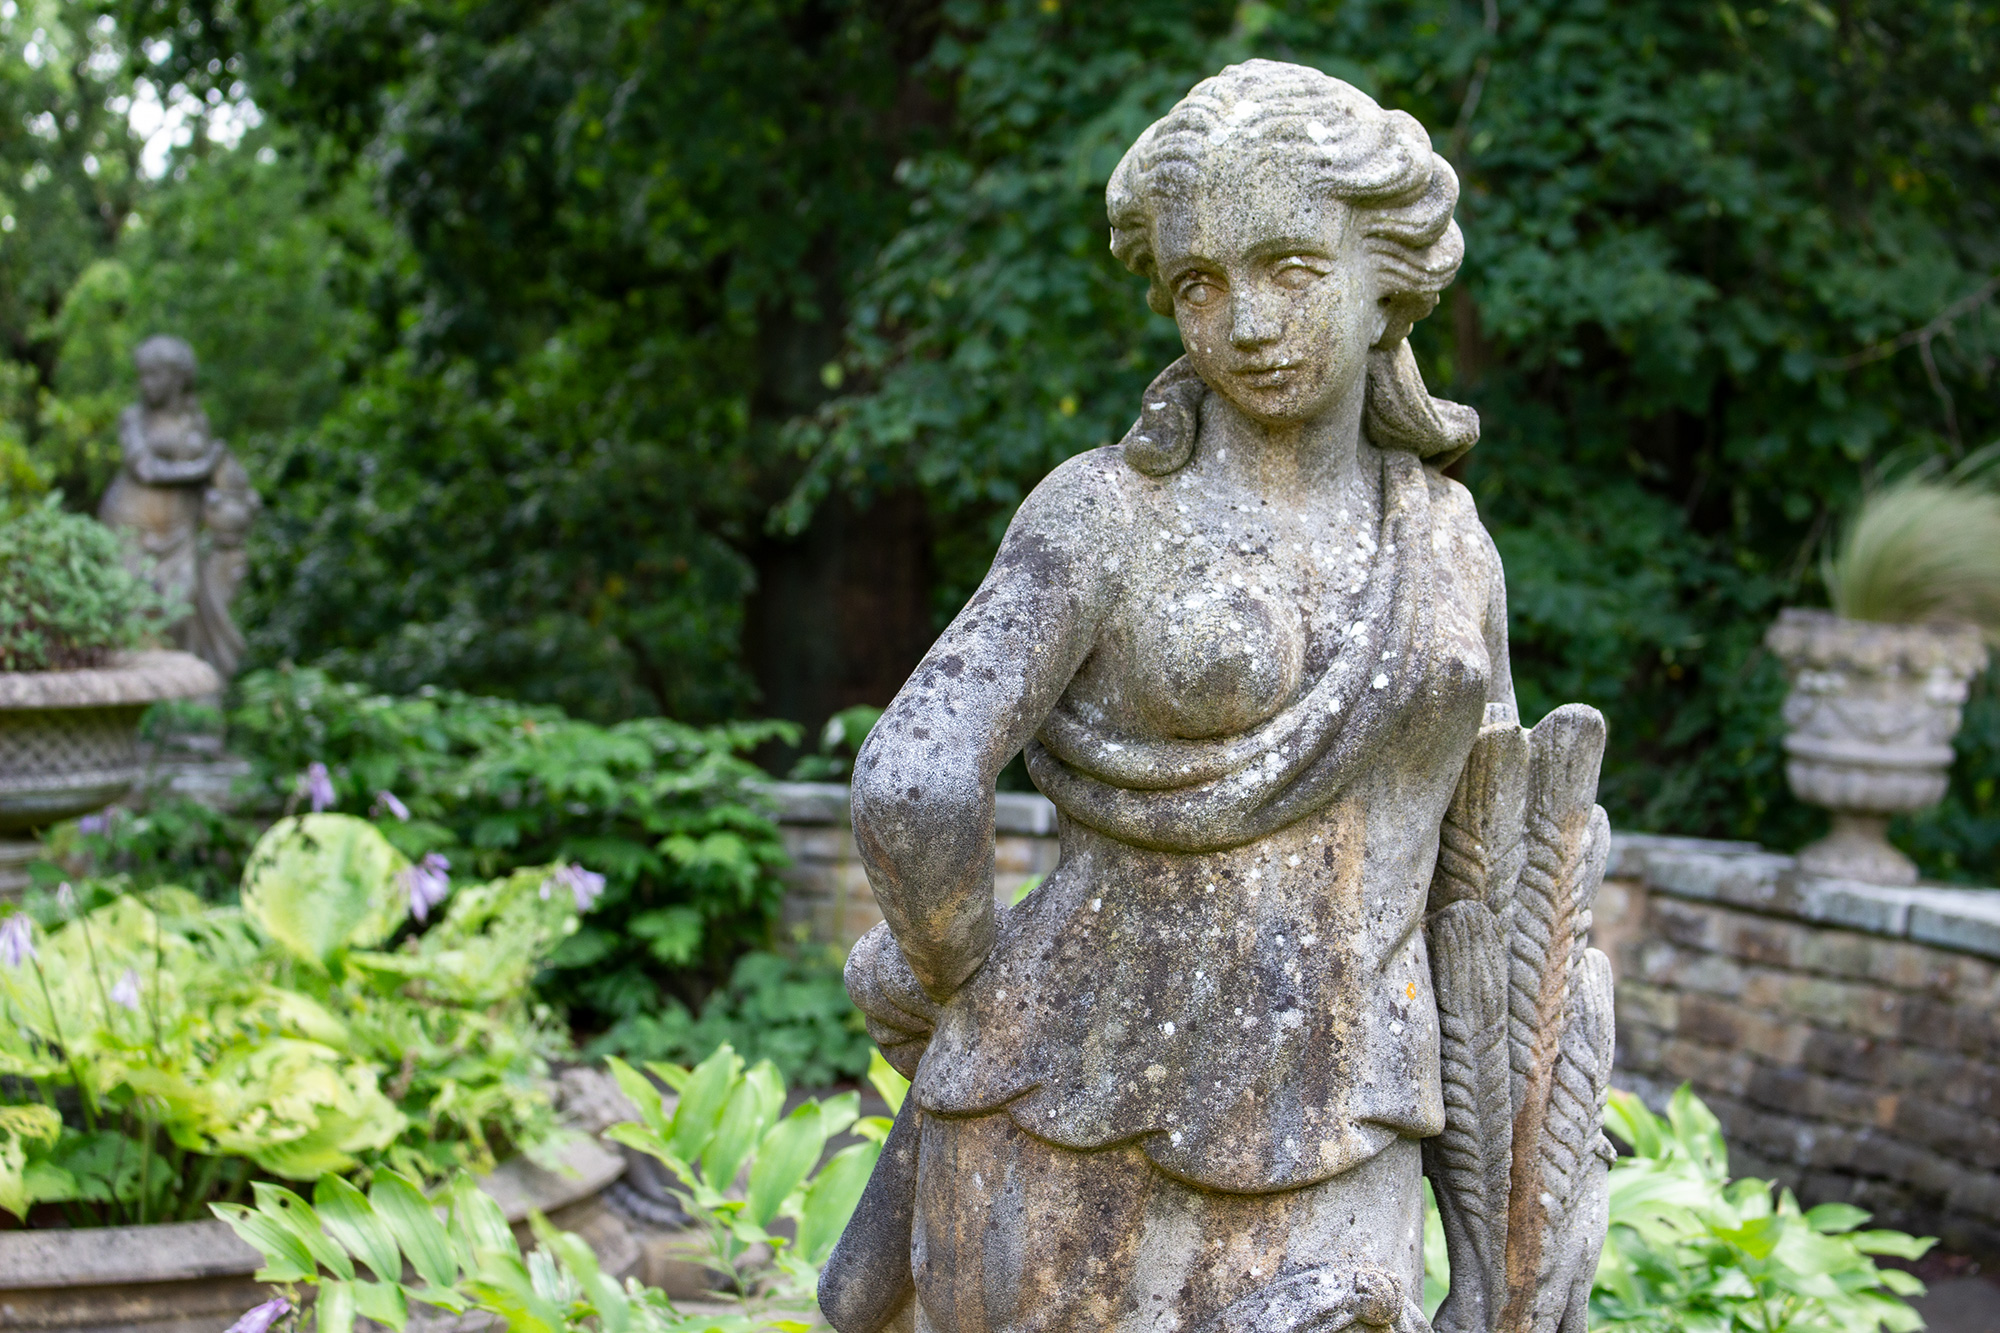 Garden Statues Exclusively by the David Sharp Studio